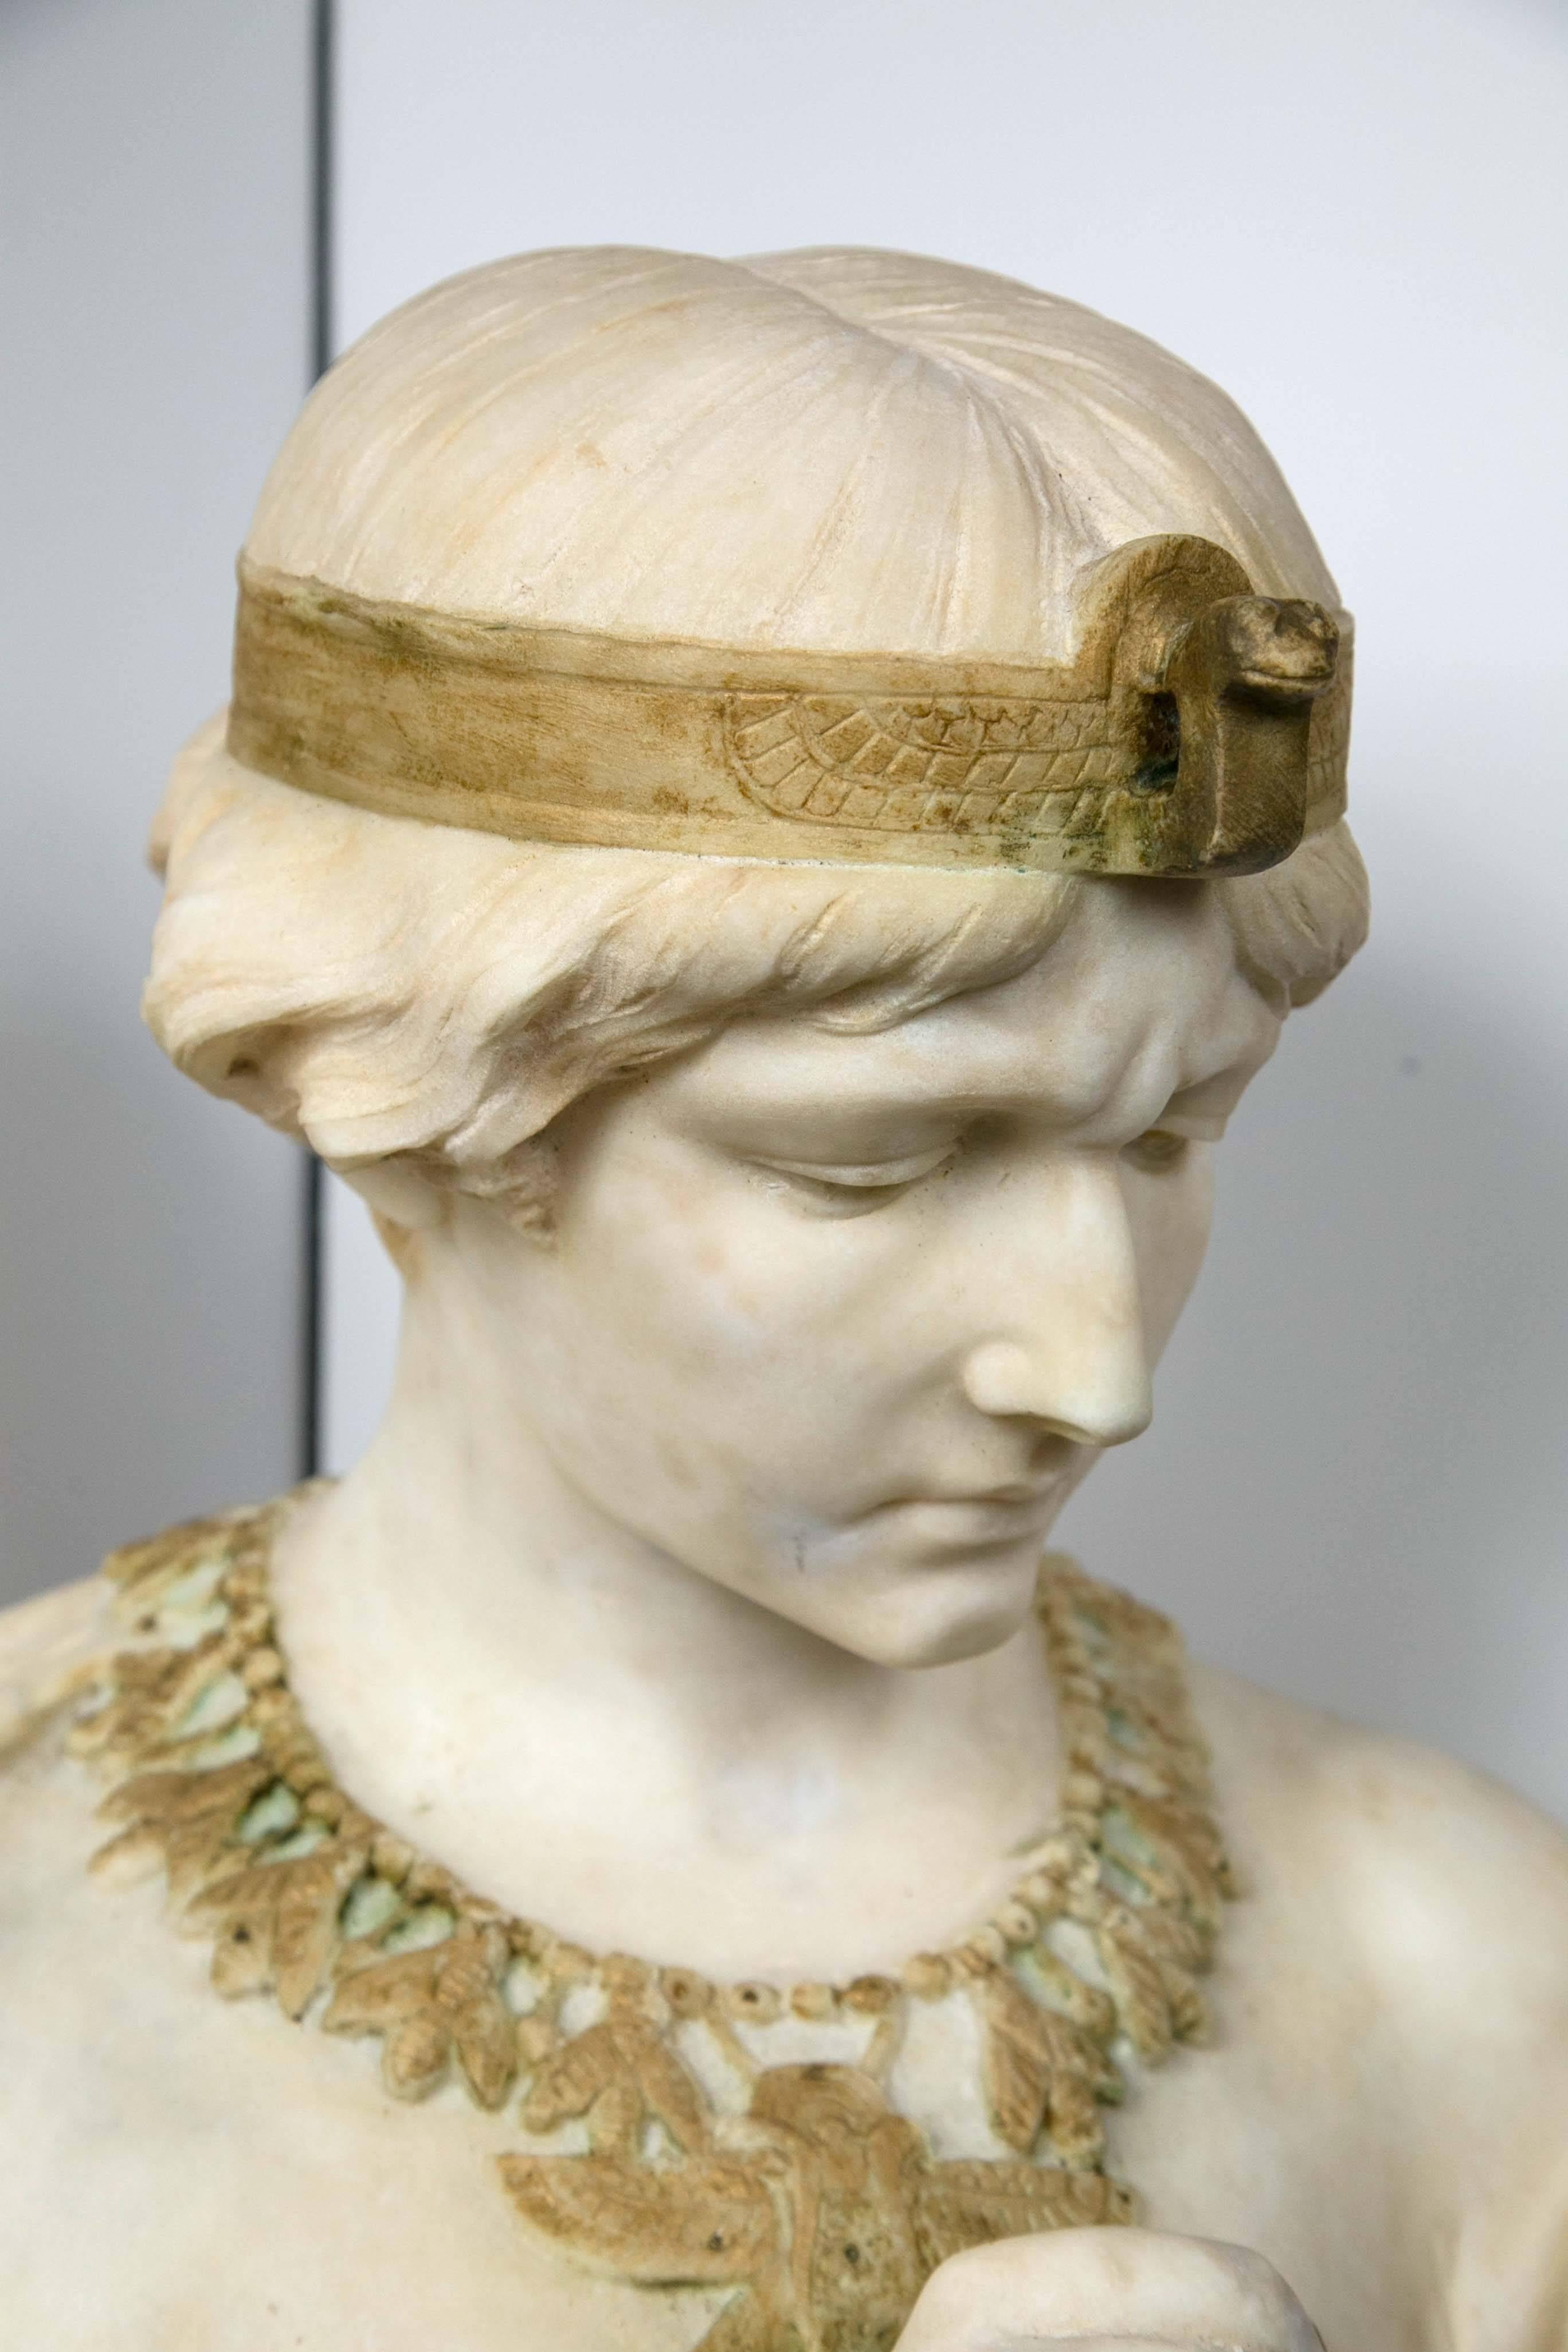 Beautifully carved unusual bust with contrasting marble highlights of an arm band with scarab, head band with snake head, necklace of bees (?) and drop central medallion with wings, and the asp in her right hand. Her hair tied in a bun. Wearing a